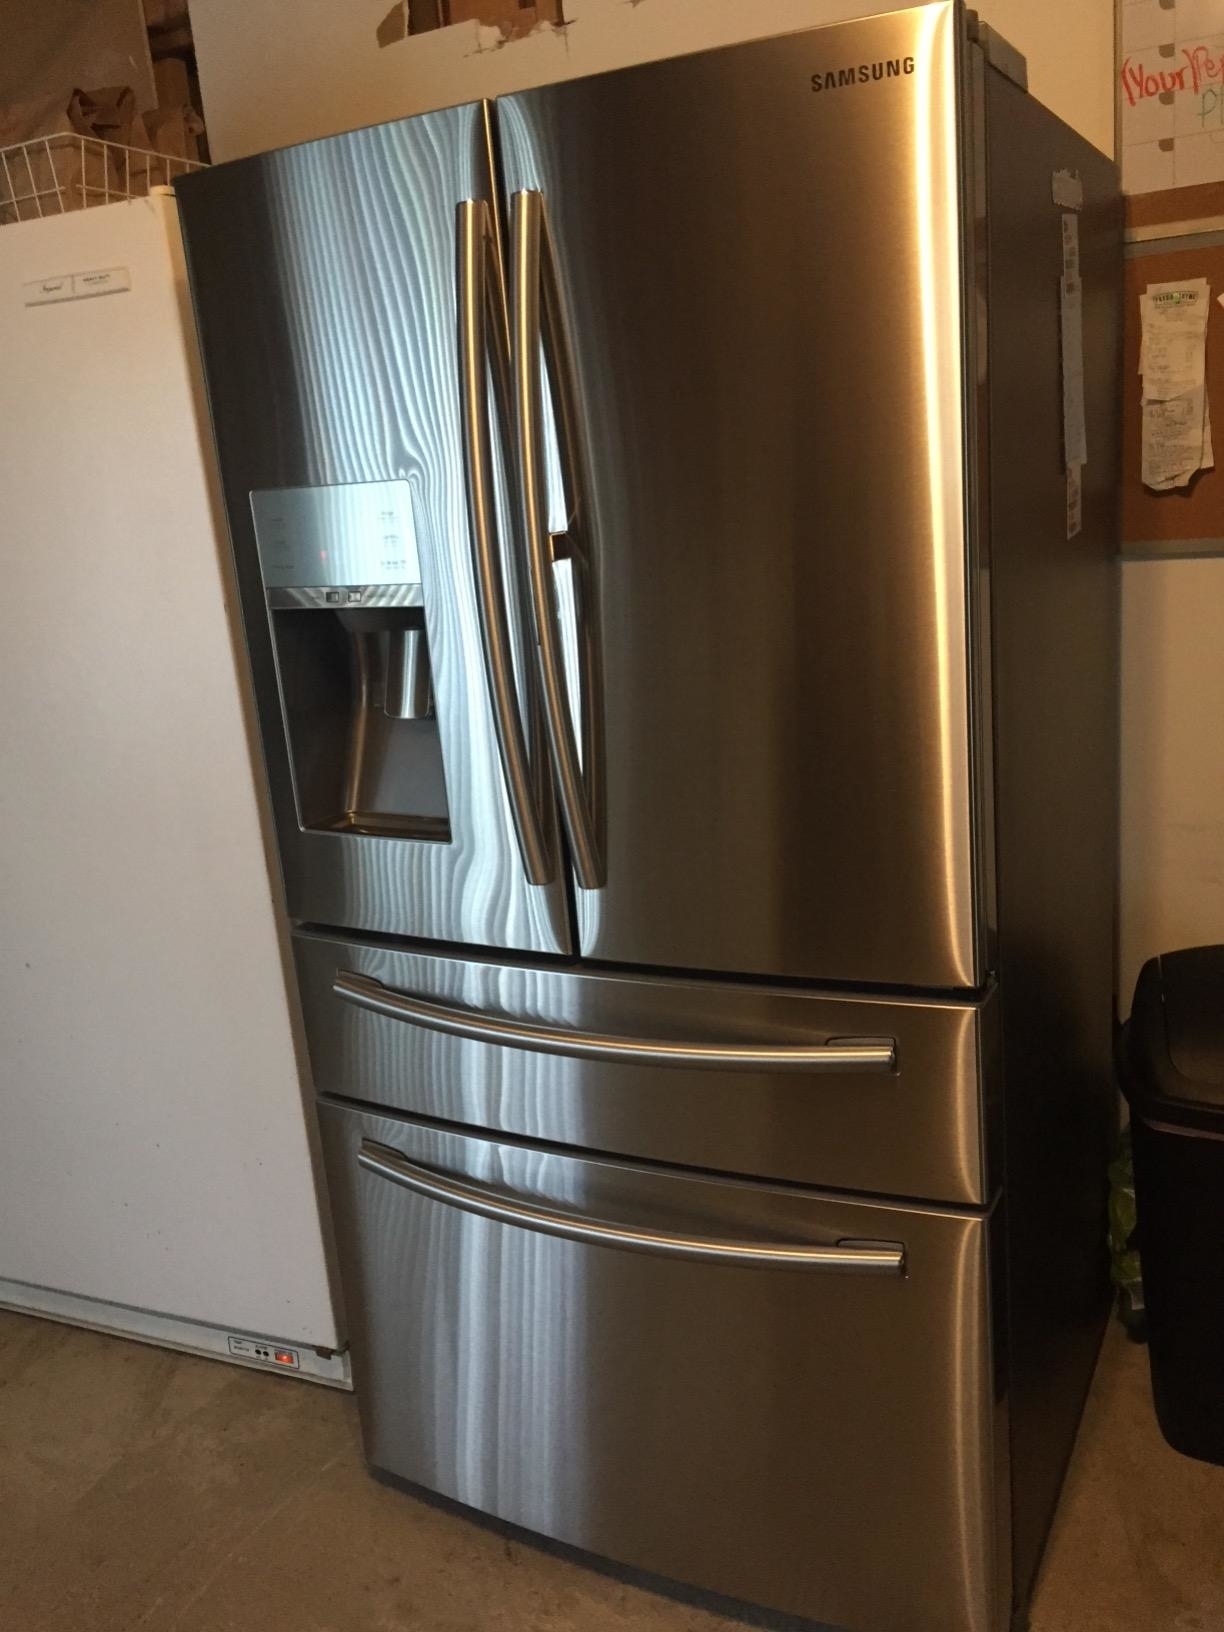 Reviewer image of their stainless steel fridge cleaned with the wipes